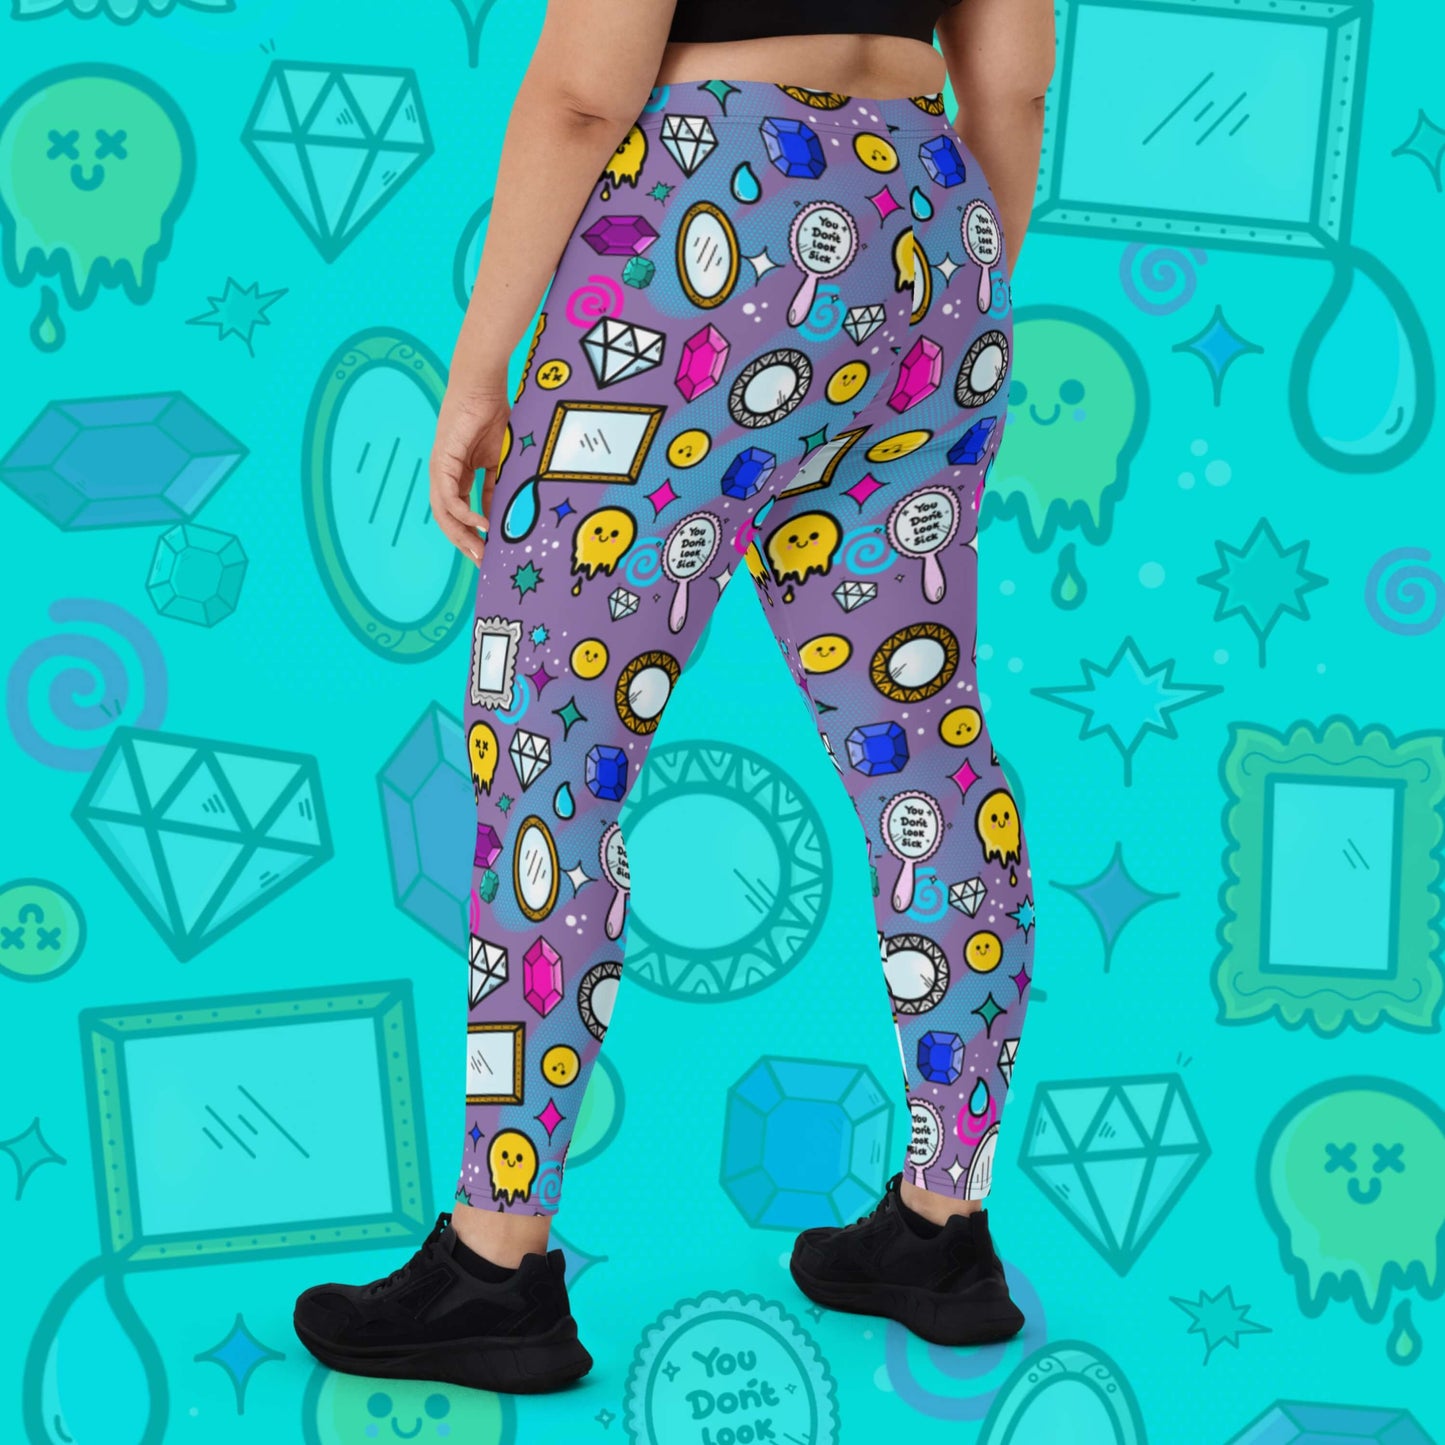 The You Don't Look Sick Leggings modelled by a femme person facing away with a black tshirt and black trainers on a blue background with a faded version of the print. The purple base leggings features melting yellow smiley faces, mirrors, gemstones, teardrops, sparkles, swirls and dots with a centre hand held mirror reading 'you don't look sick'. The hand drawn design is raising awareness for invisible illnesses.